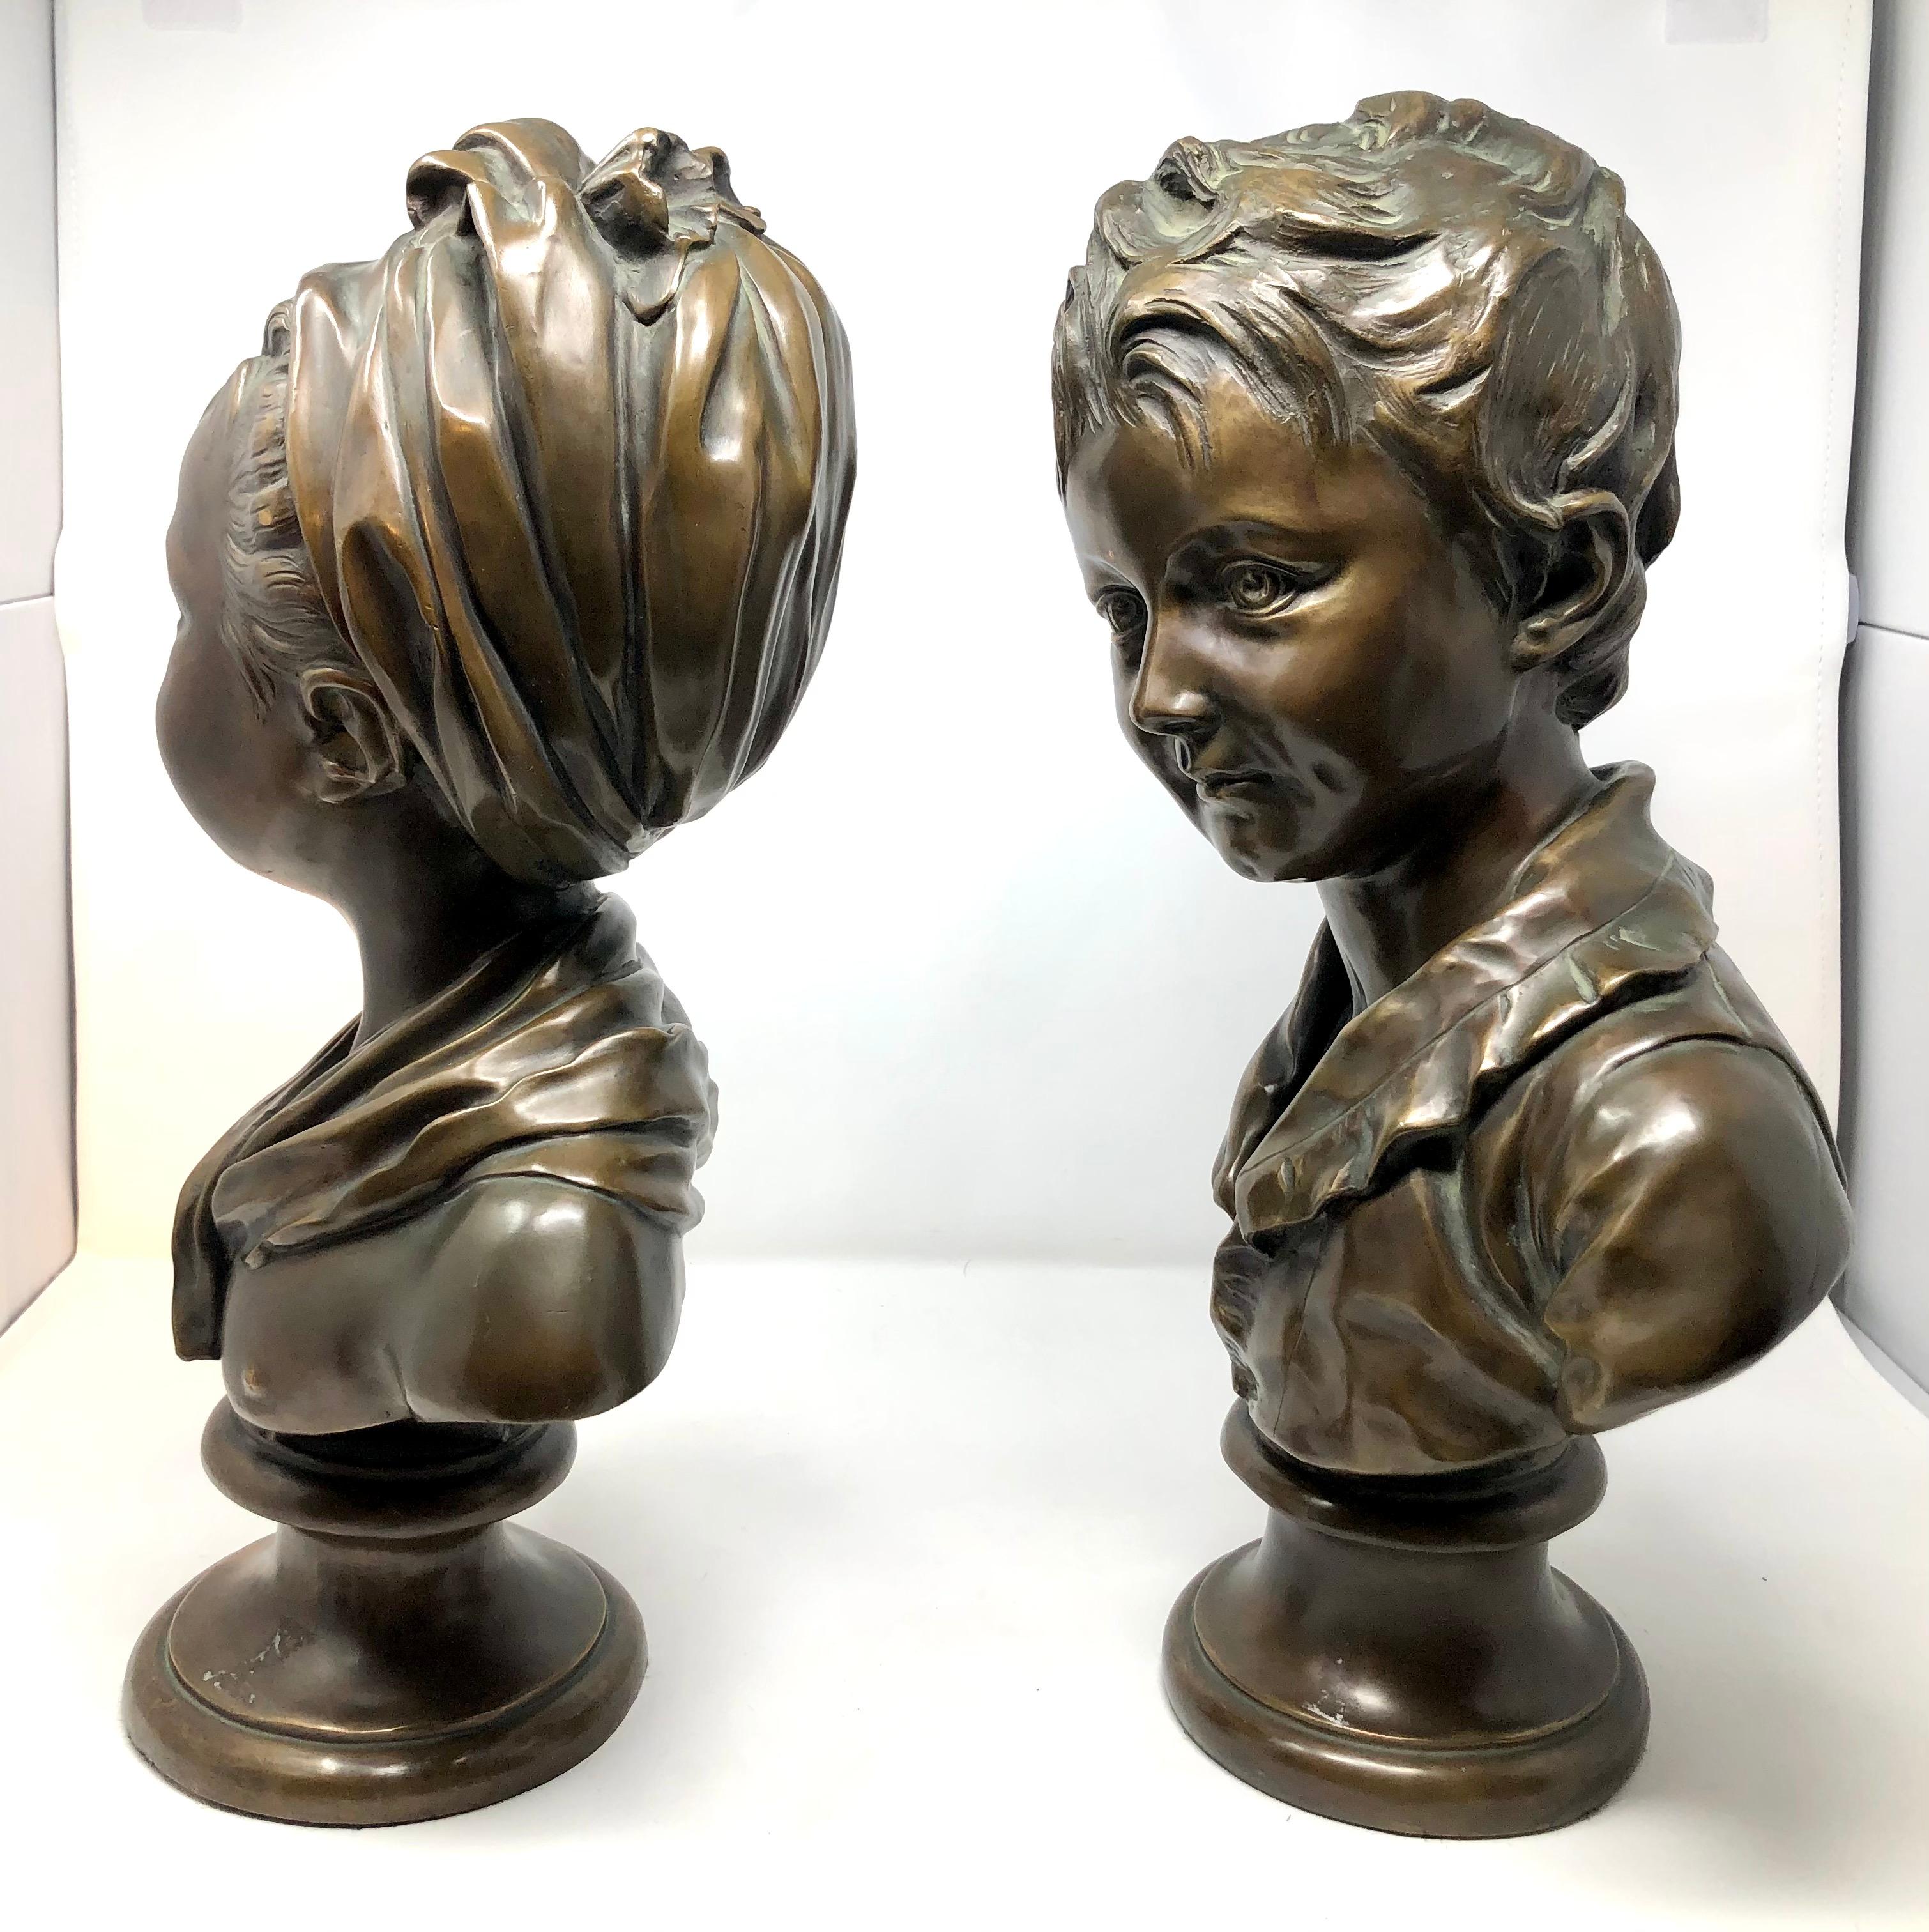 Pair antique 19th century French neo-classical style bronze portrait busts of Children after Jean-Antoine Houdon.